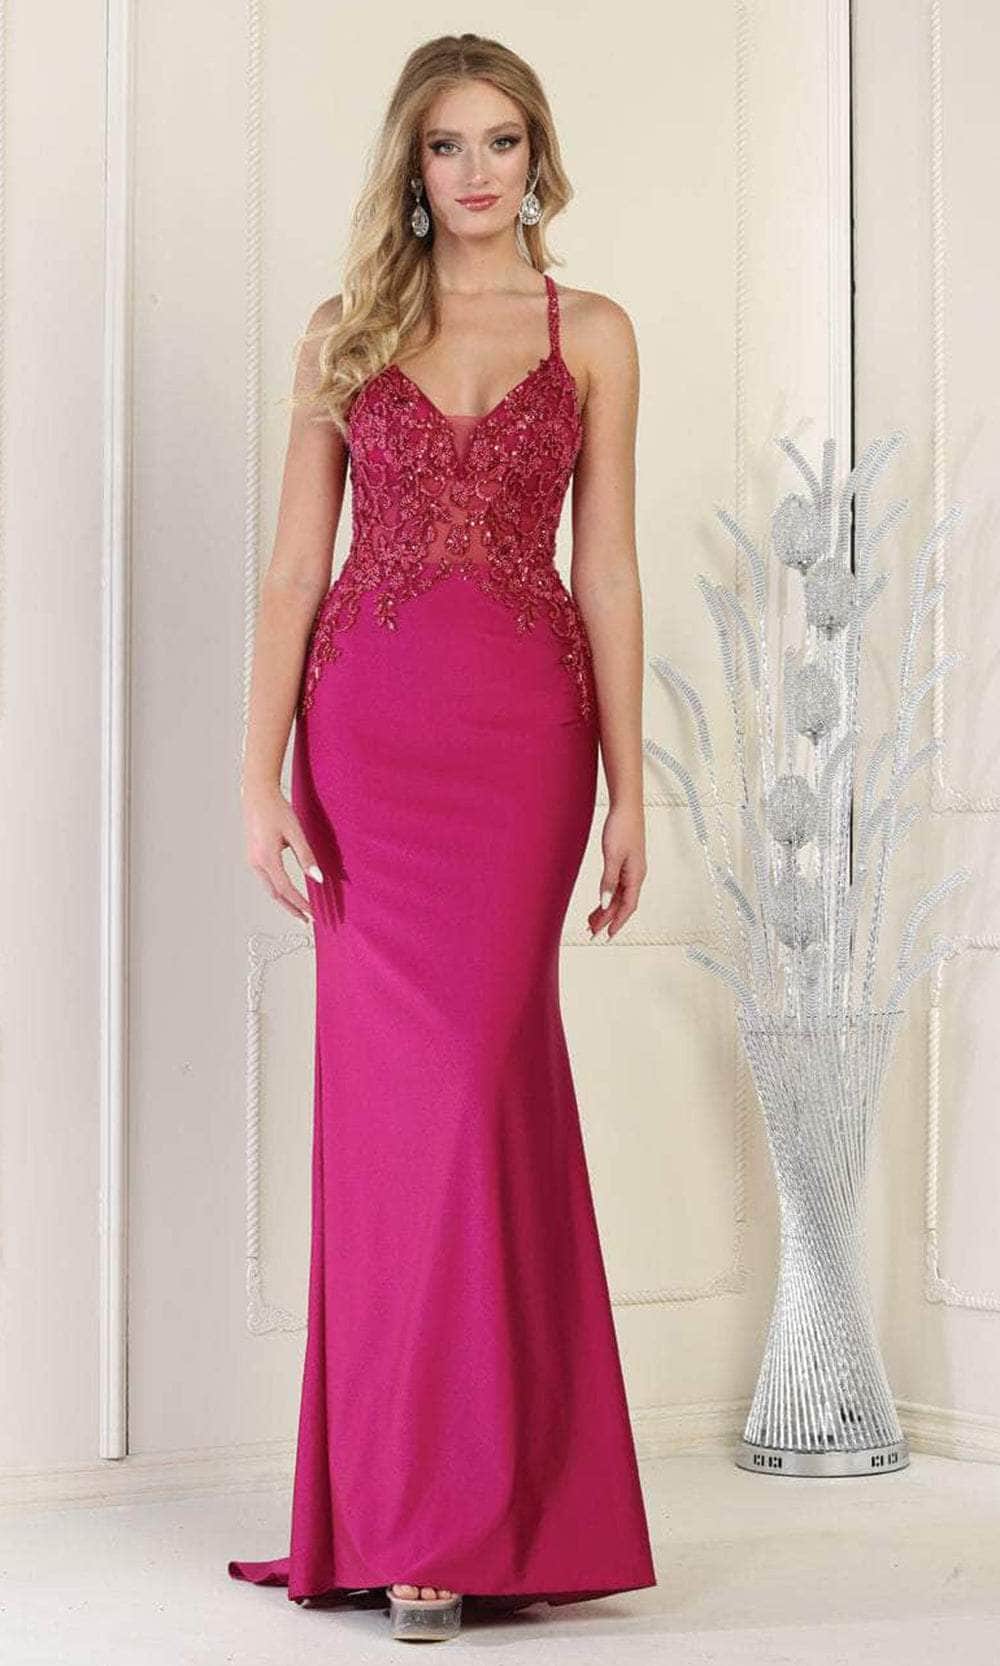 May Queen RQ7991 - Embellished Sleeveless Evening Dress
